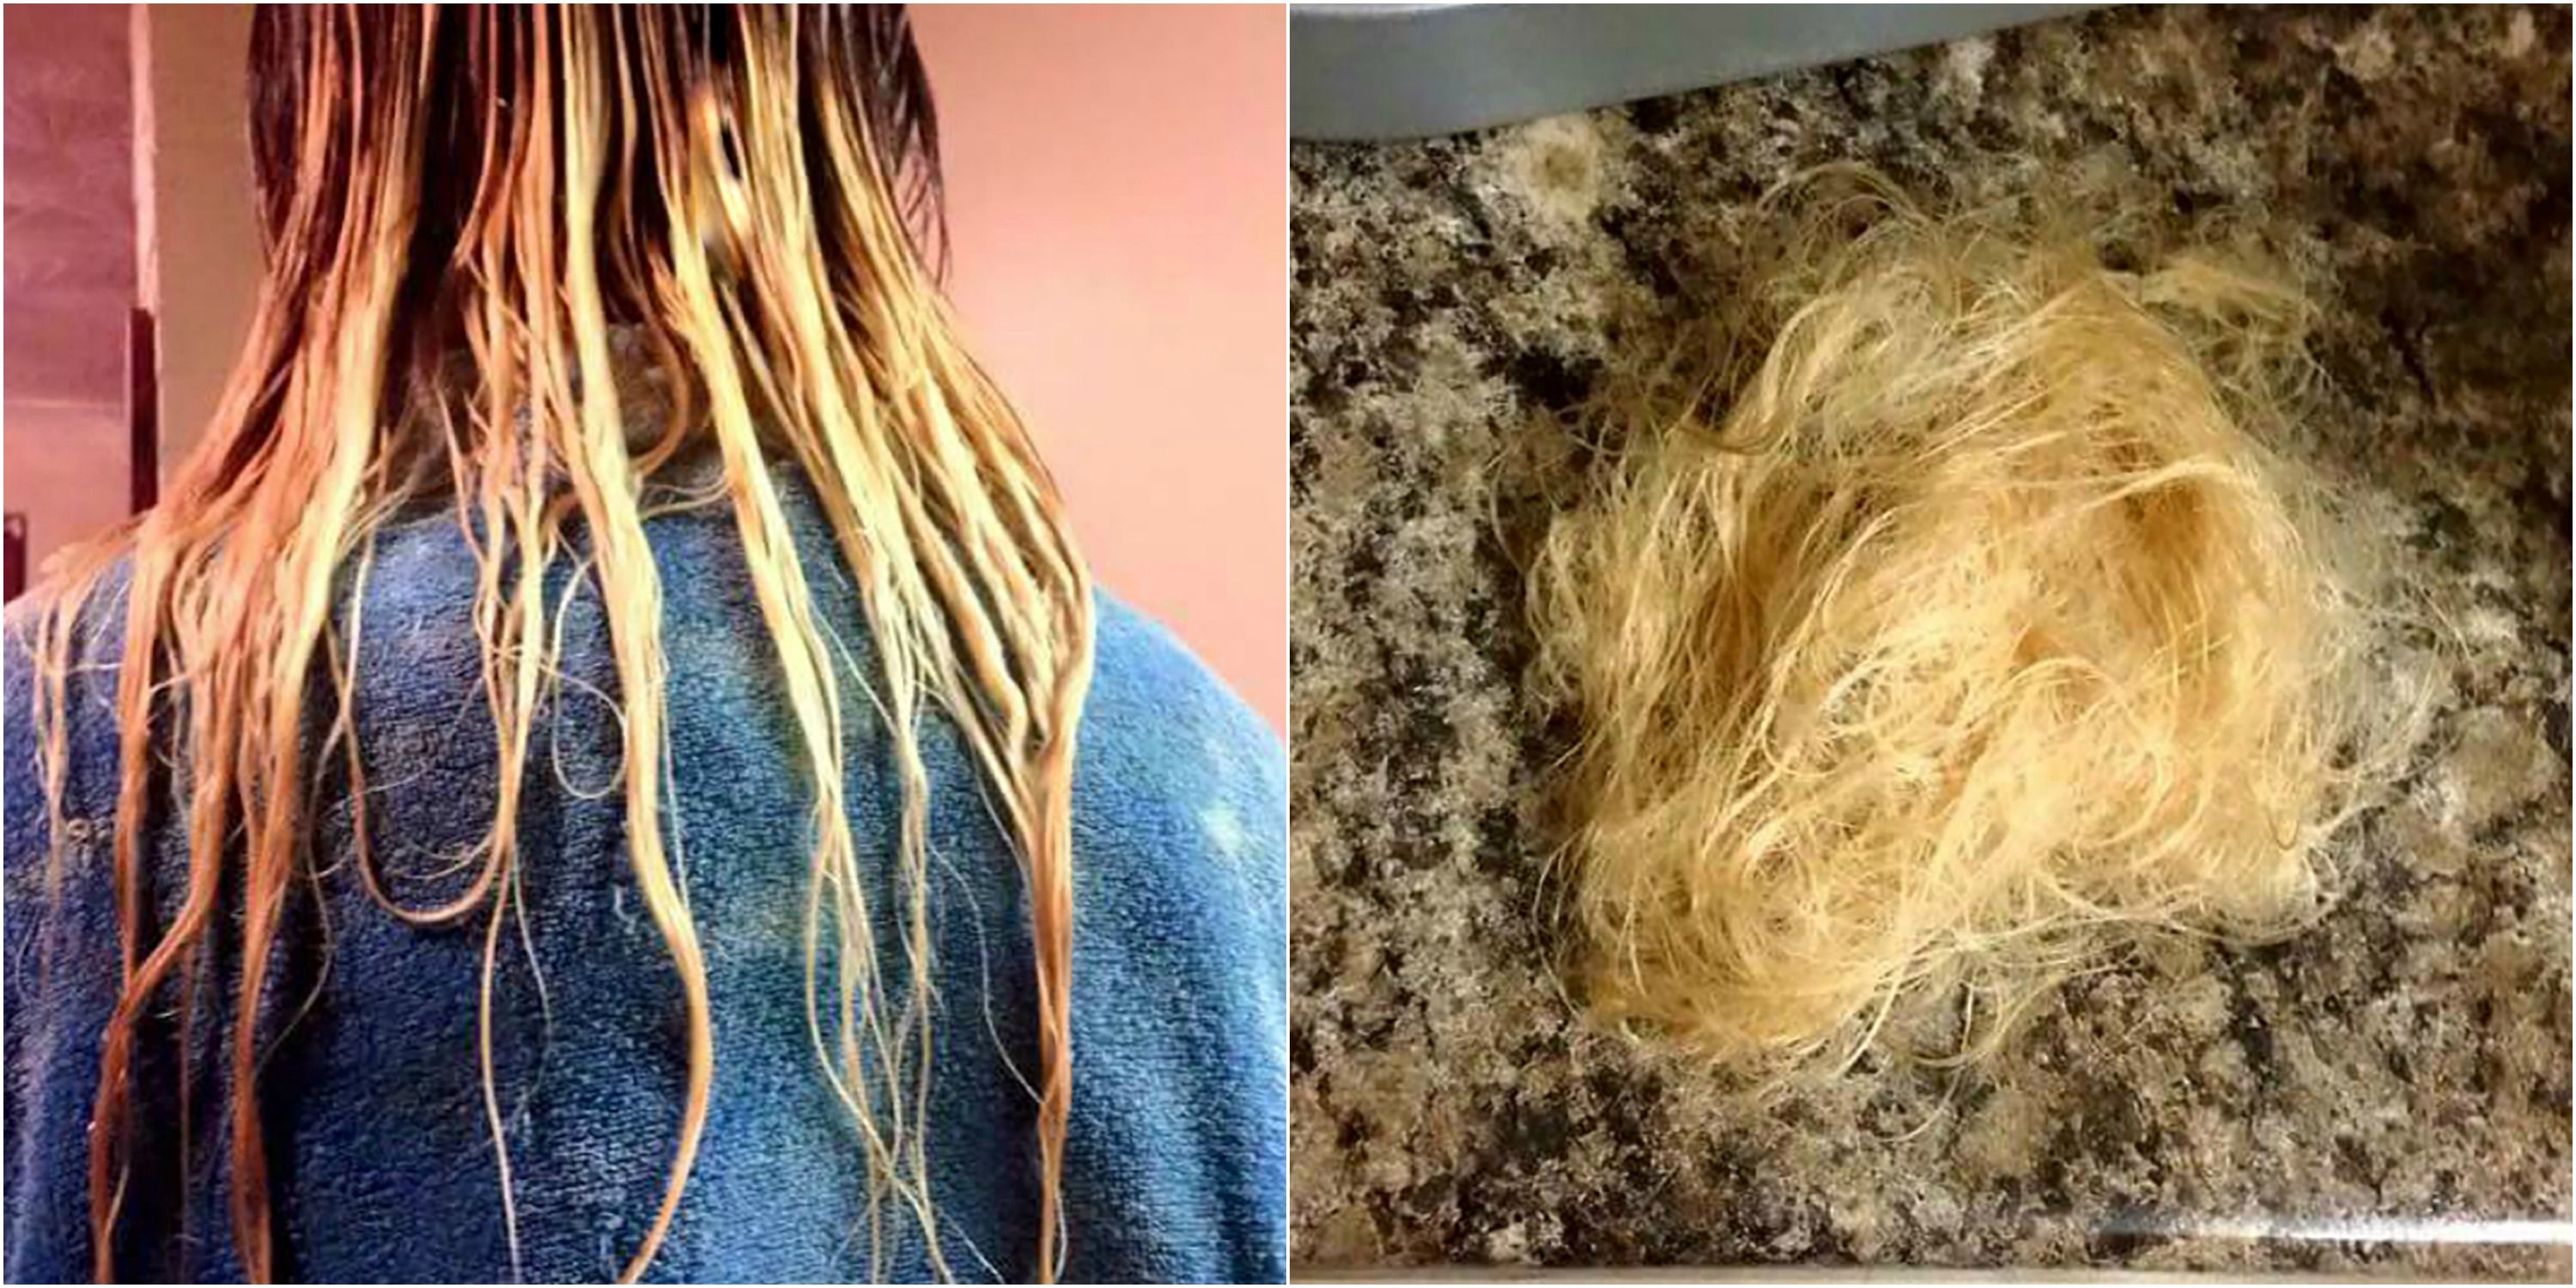 Teen S Hair Is Burnt Off After Trying To Diy Ombre Hair Color